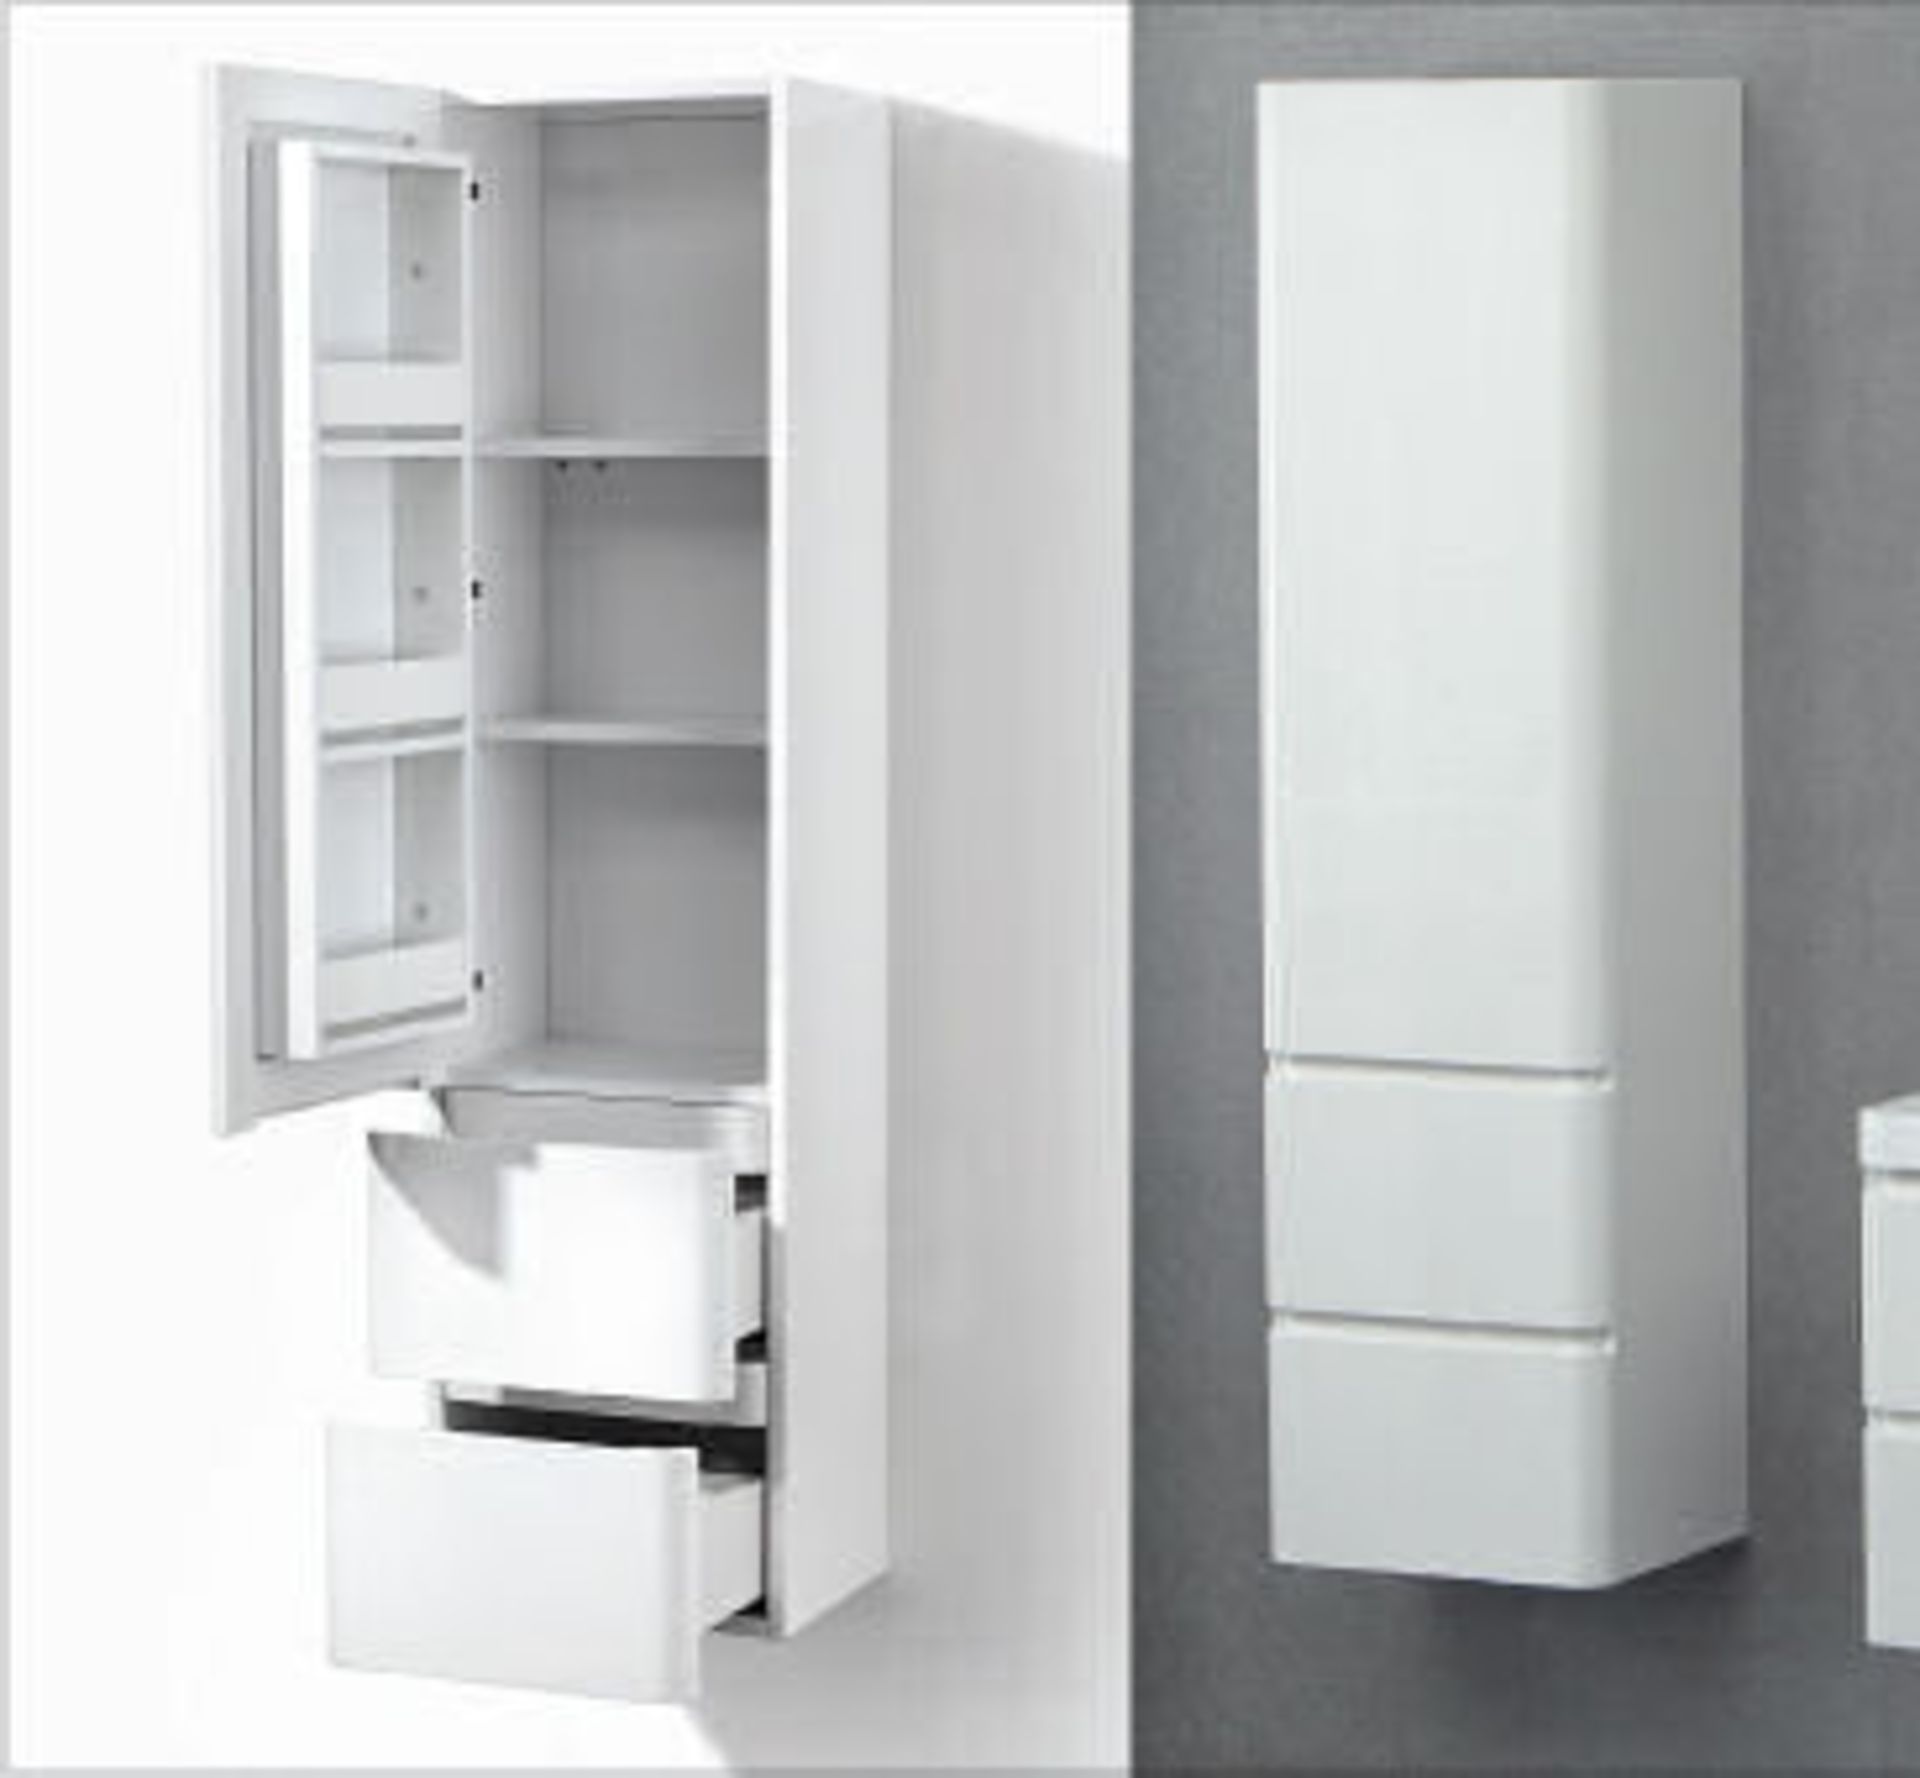 1 x White Gloss Storage Cabinet 155 - A-Grade - Ref:ASC41-155 - CL170 - Location: Nottingham NG2 -